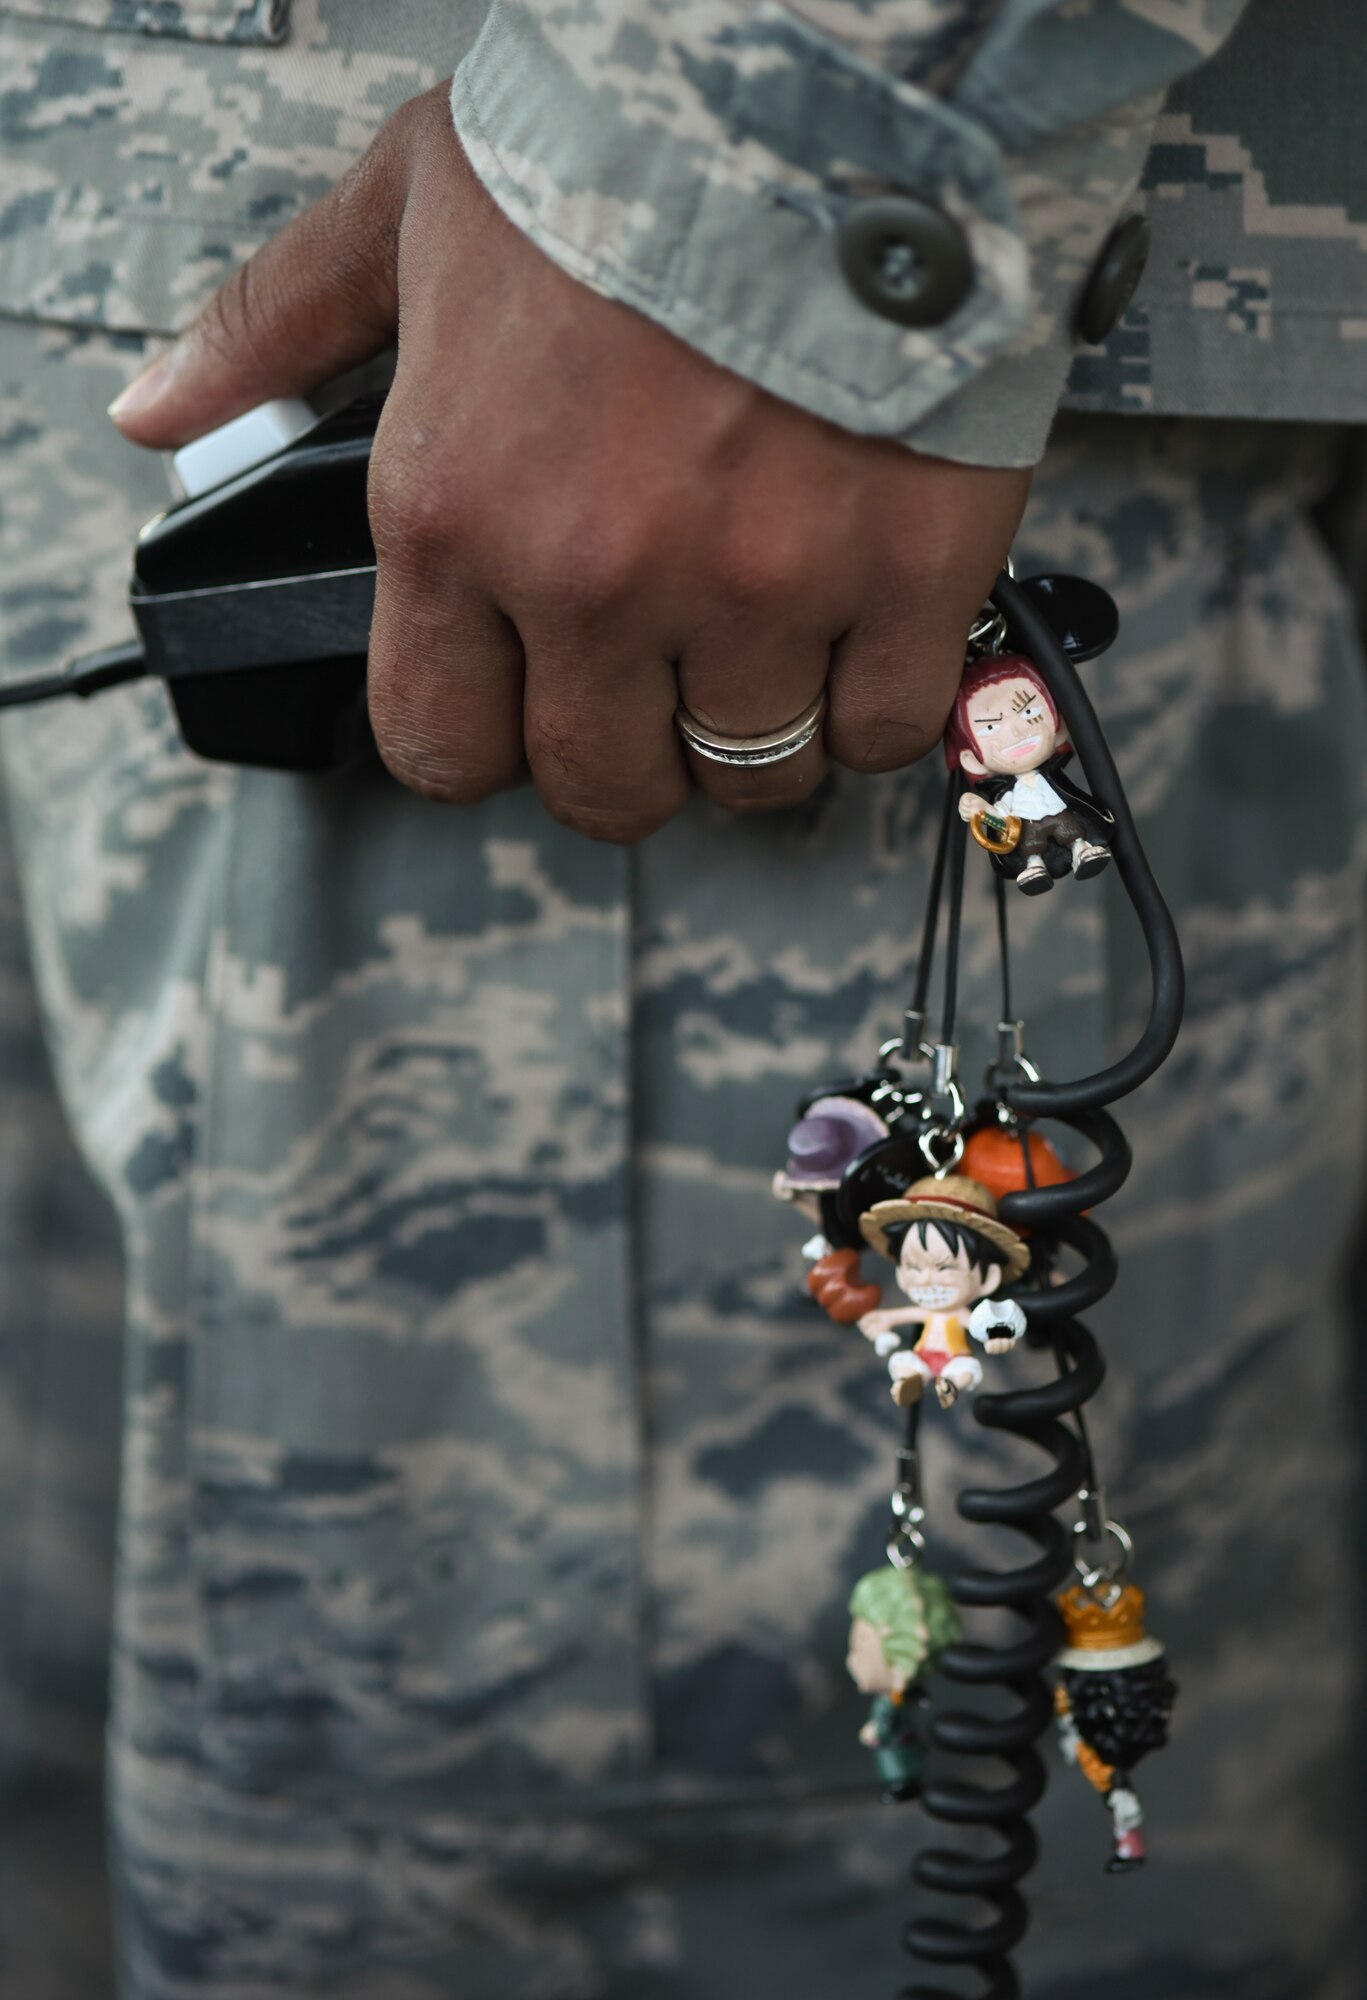 Staff Sgt. Randall Vaughn, 374th Operations Support Squadron radar approach control supervisor, touches his personalized headset at the air traffic control tower at Yokota Air Base, Japan, May 8, 2015. Vaughn uses the headset to talk to incoming and outgoing aircraft at Yokota. (U.S. Air Force photo by Senior Airman Michael Washburn/Released)